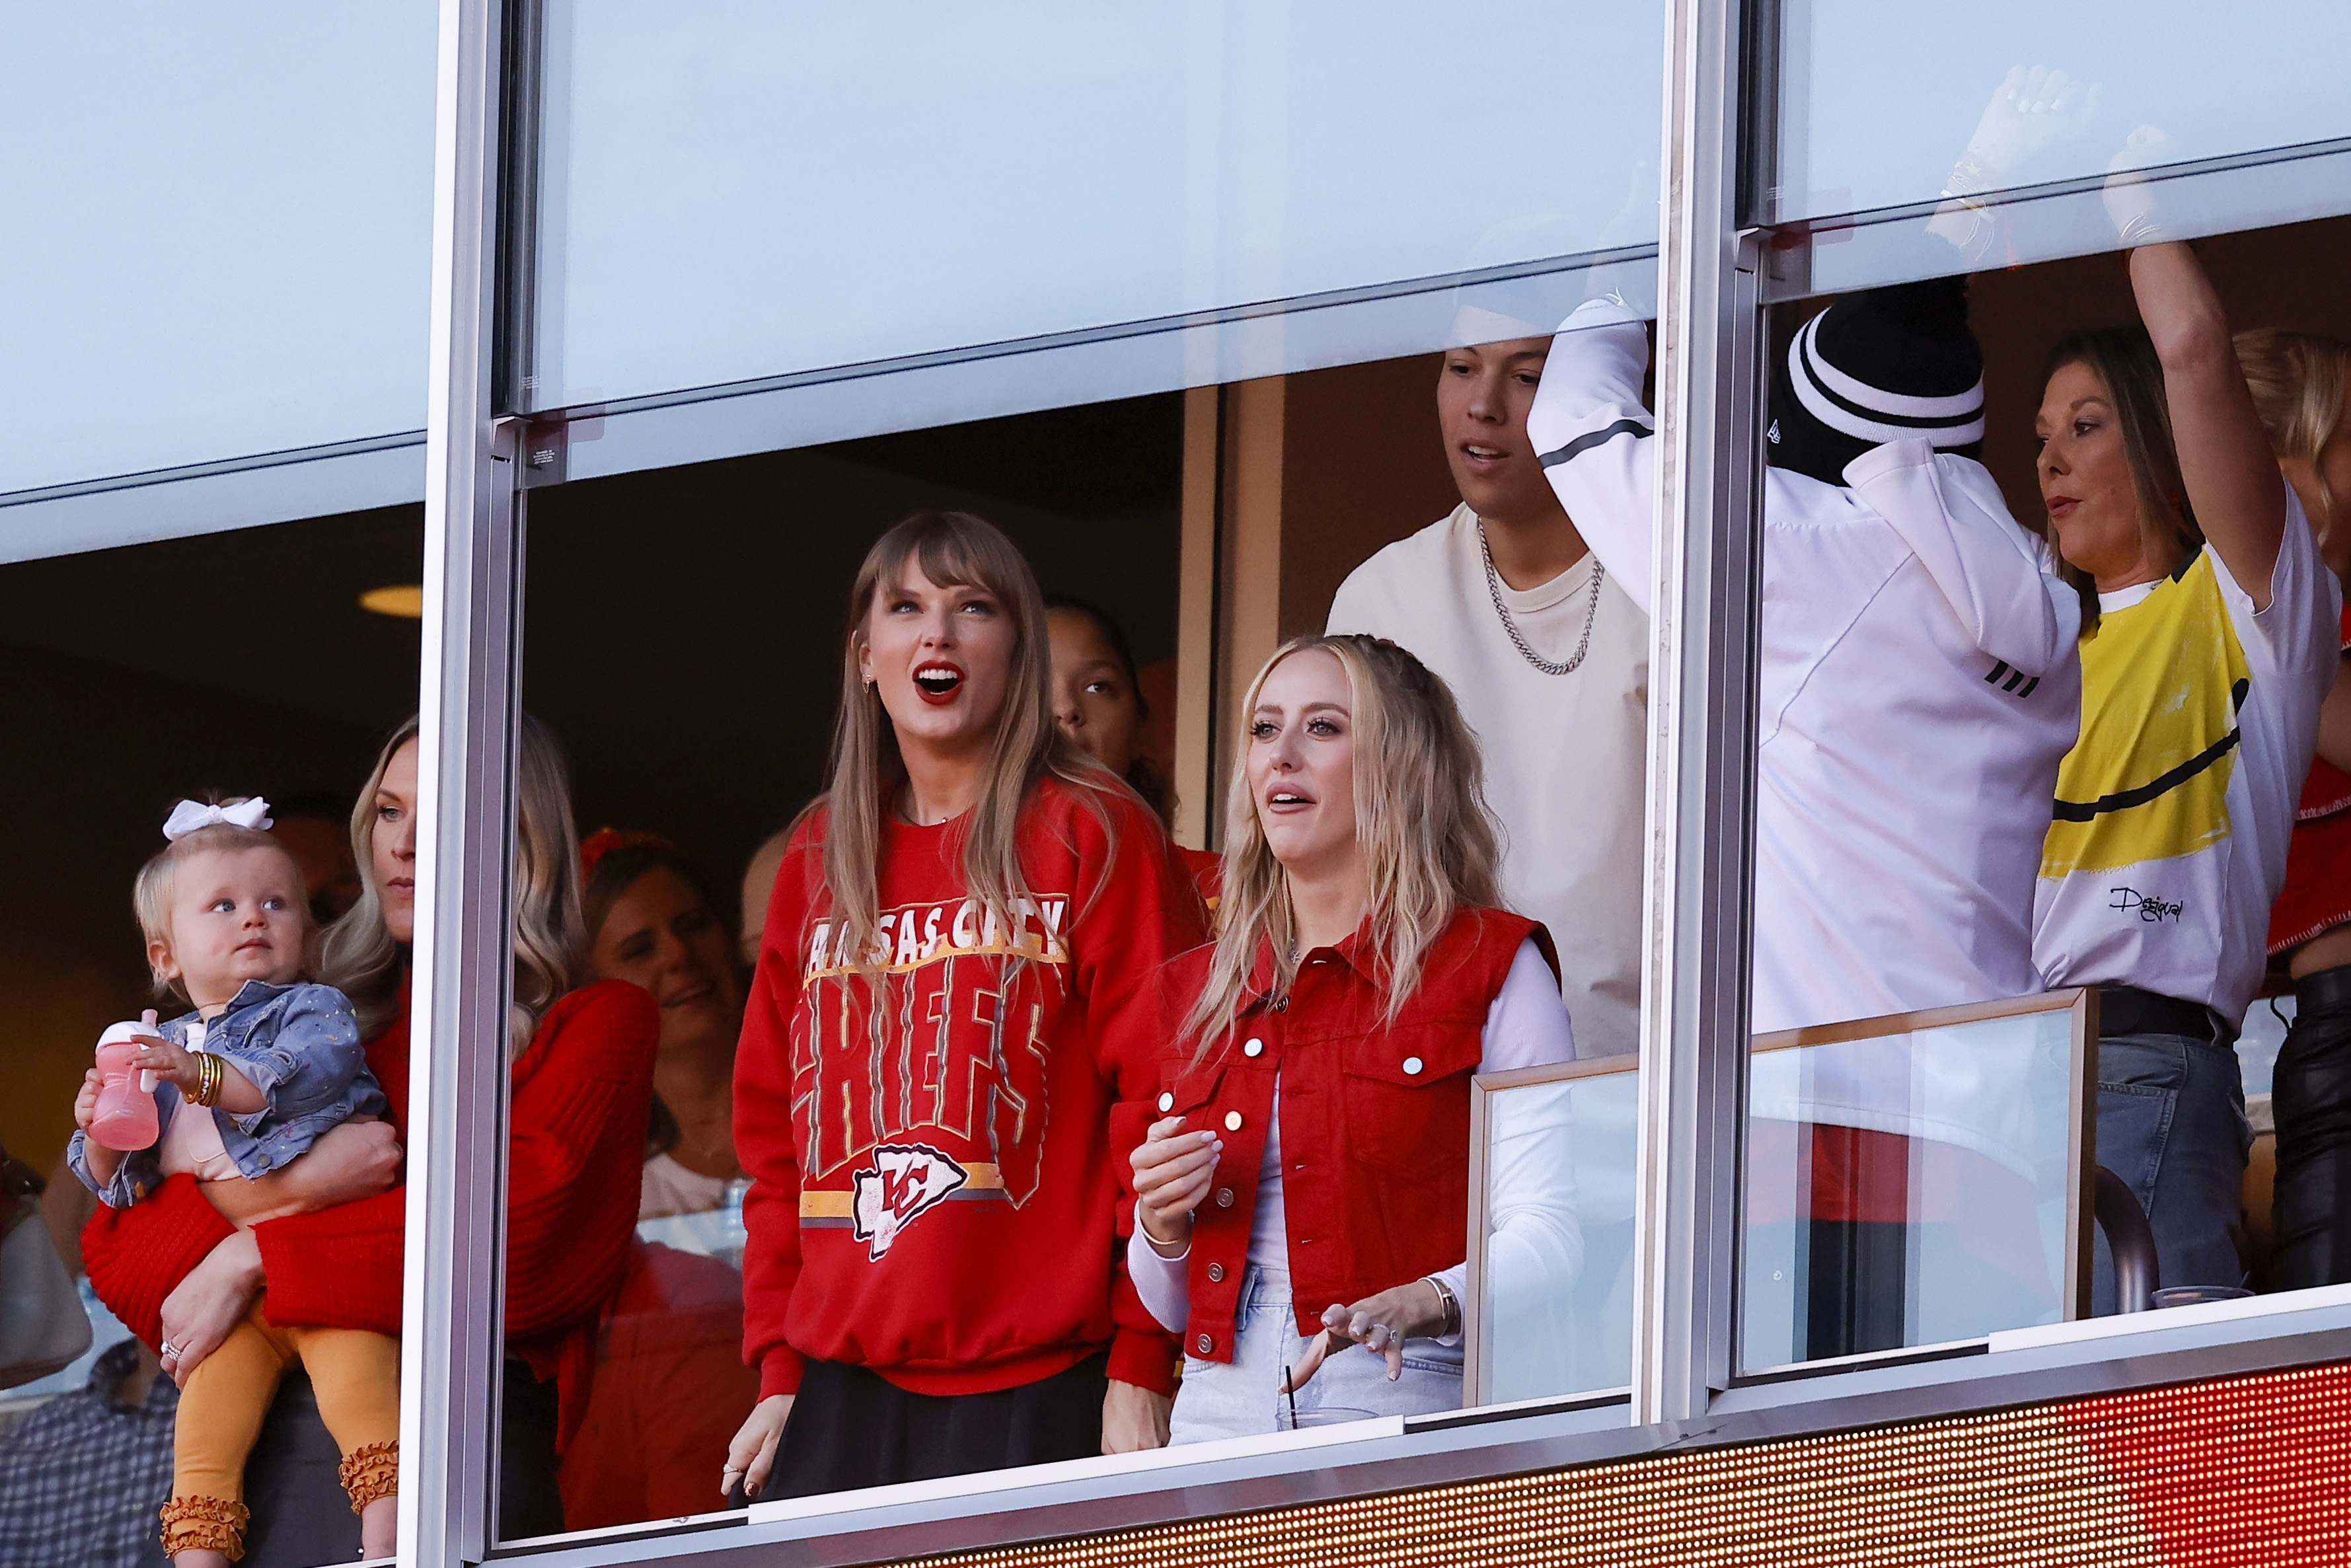 Group of people including Taylor Swift in a VIP box cheering on Kelce and his team